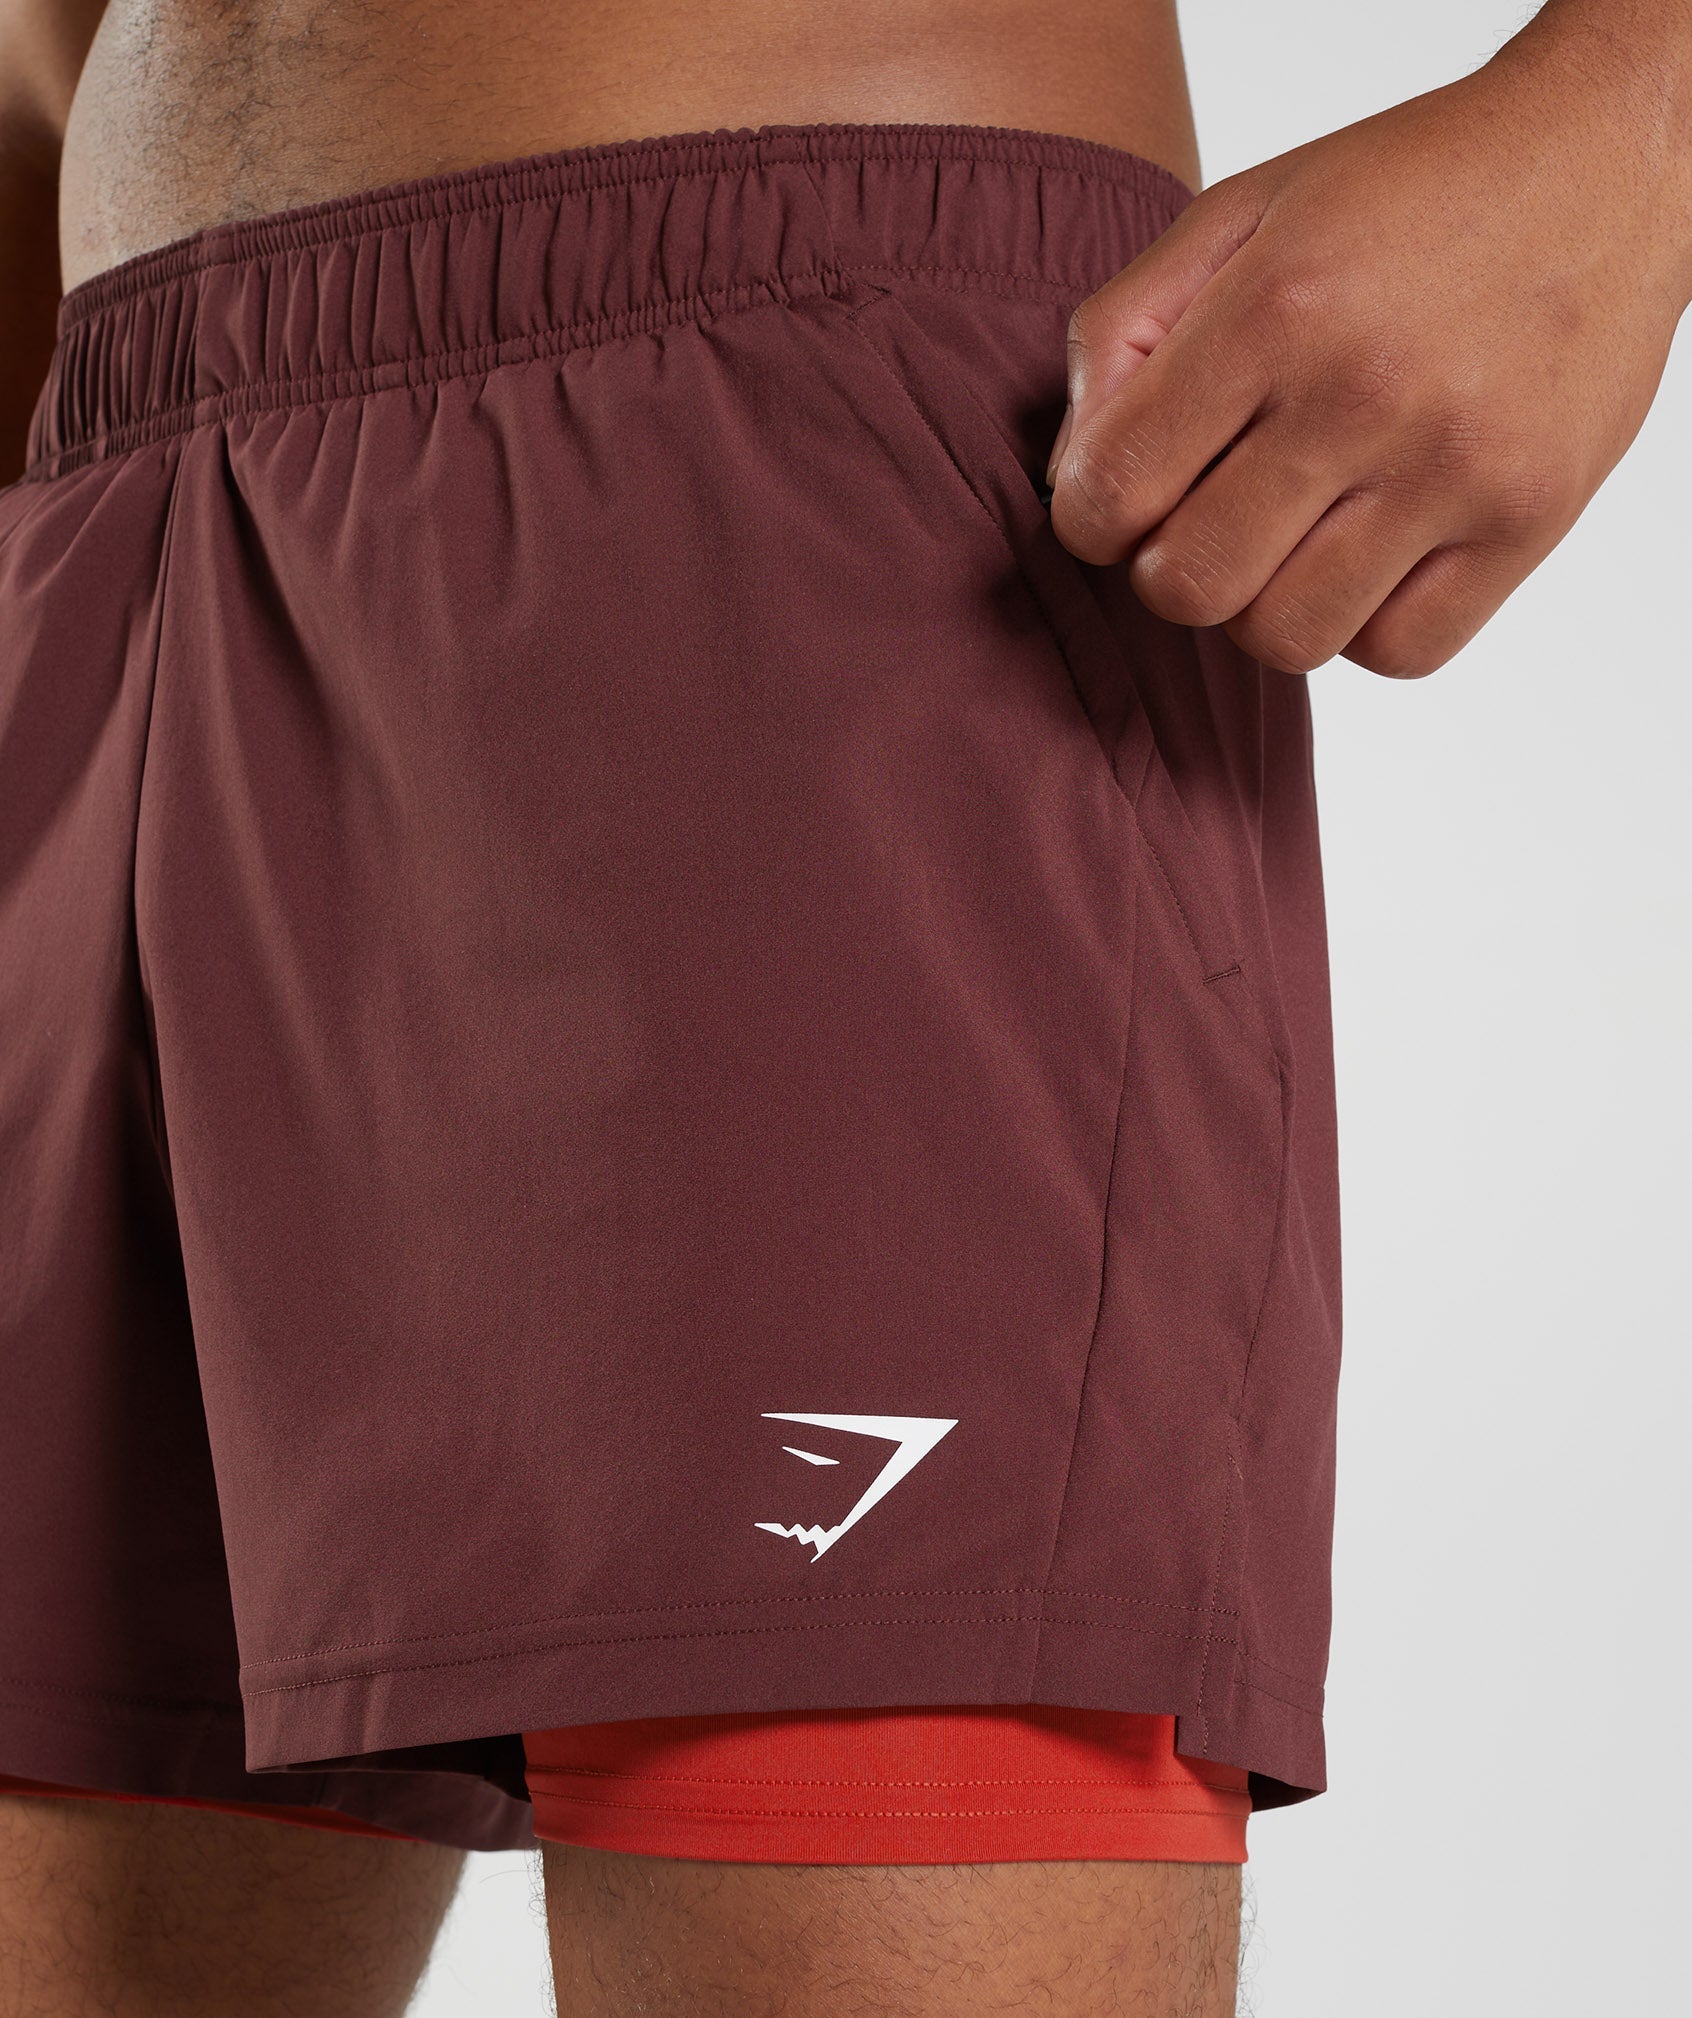 Sport 5" 2 In 1 Shorts in Baked Maroon/Salsa Red